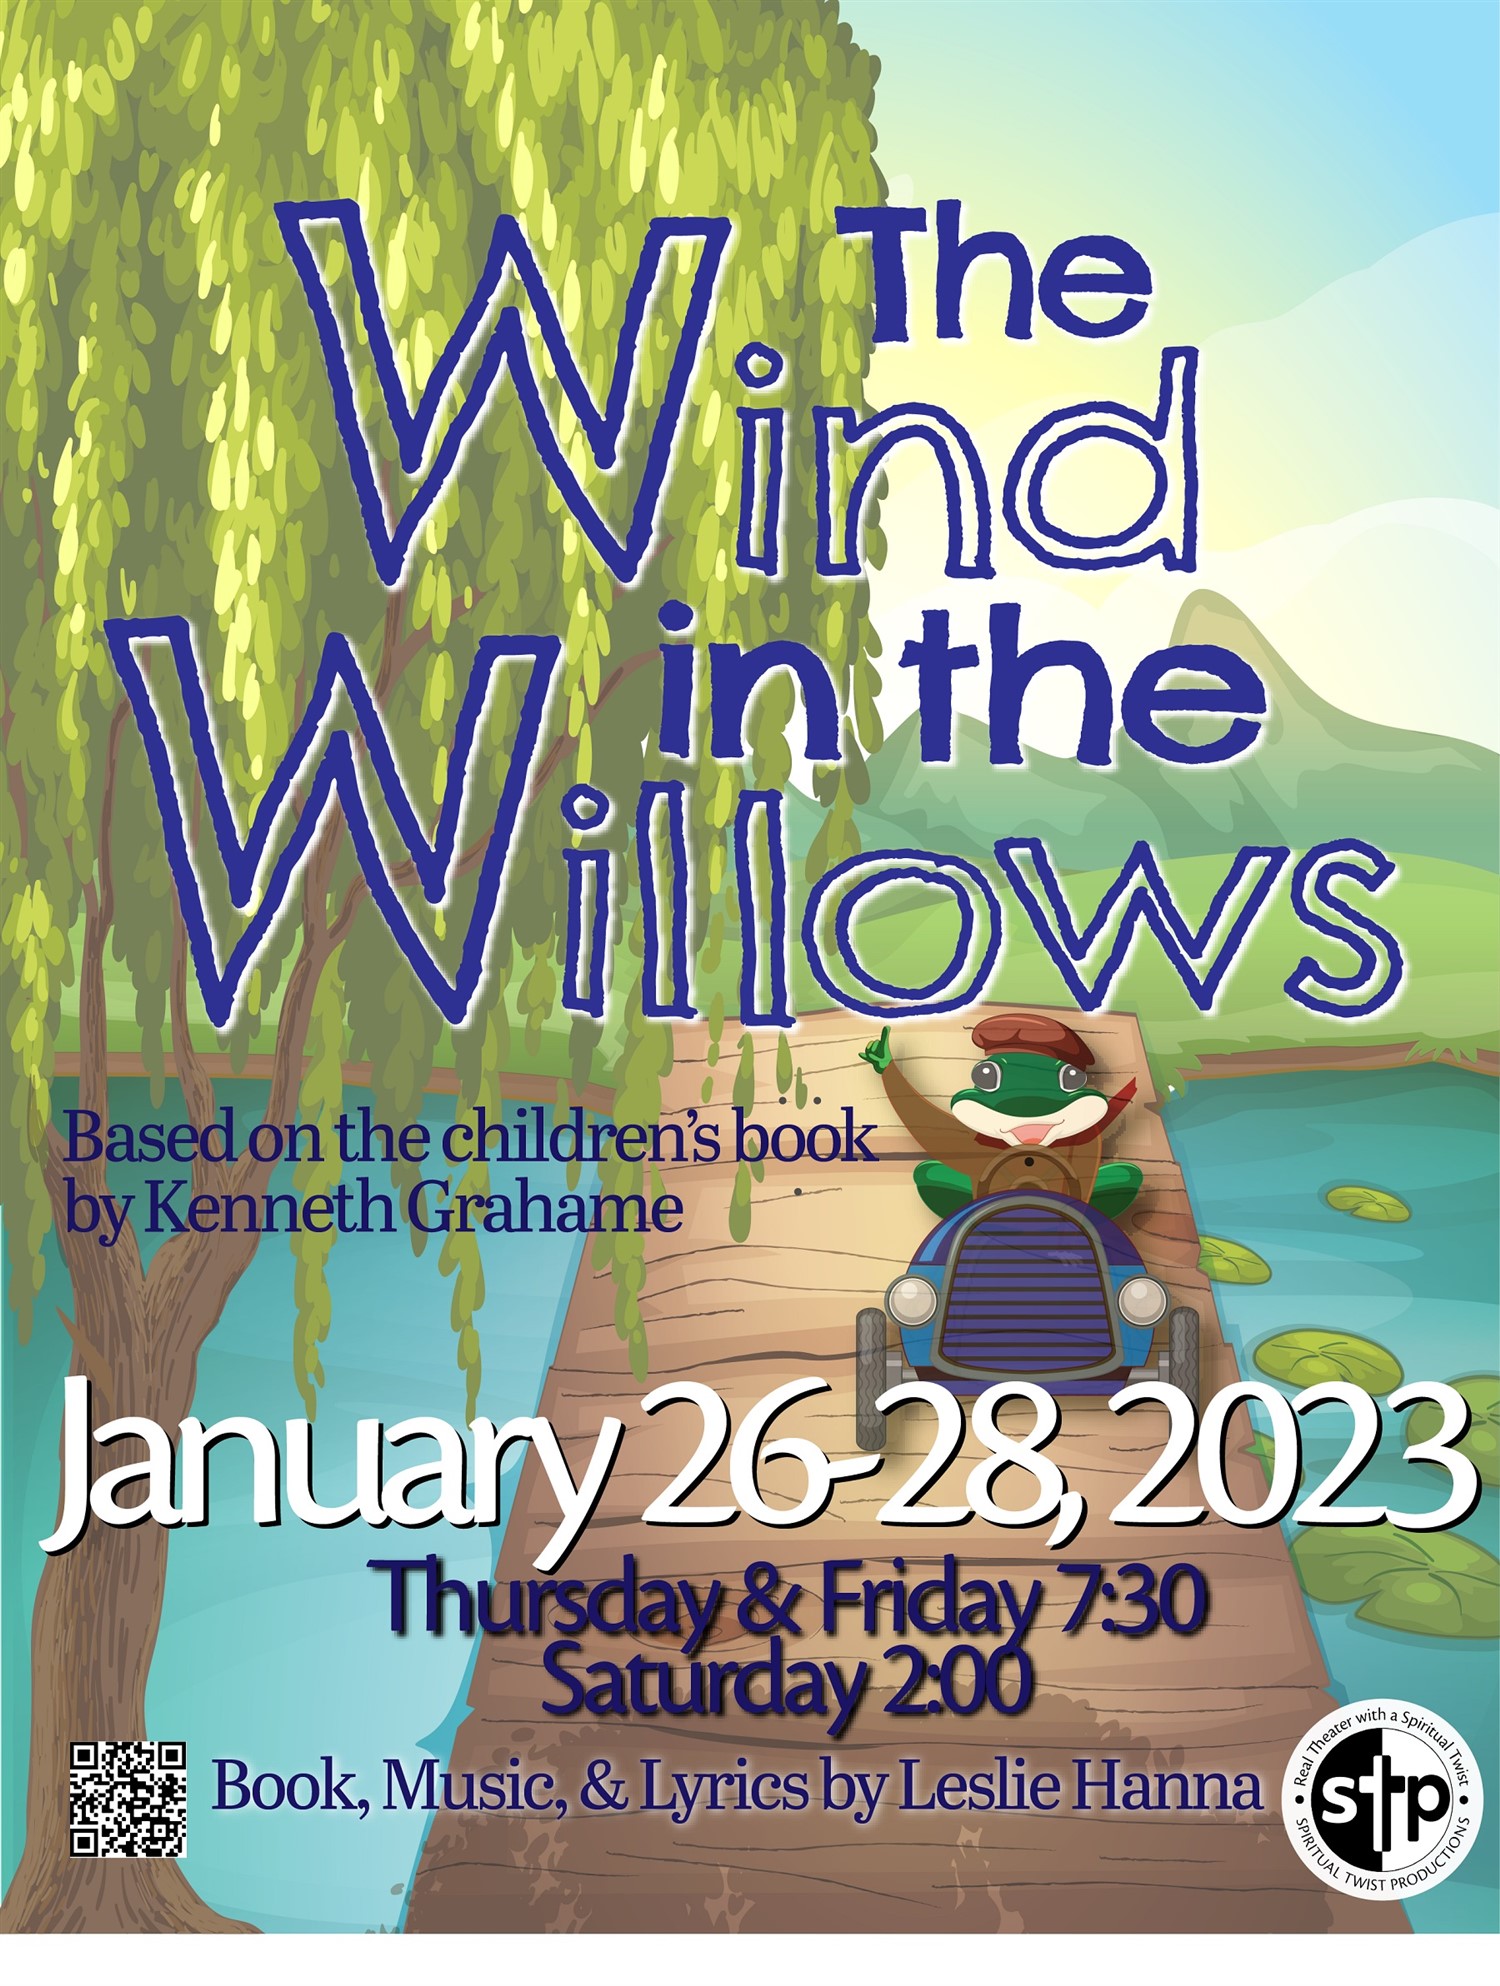 The Wind in the Willows Saturday, January 28, 2023 @ 2:00 PM on Jan 28, 14:00@Spiritual Twist Productions - Pick a seat, Buy tickets and Get information on Spiritual Twist Productions tickets.spiritualtwist.com